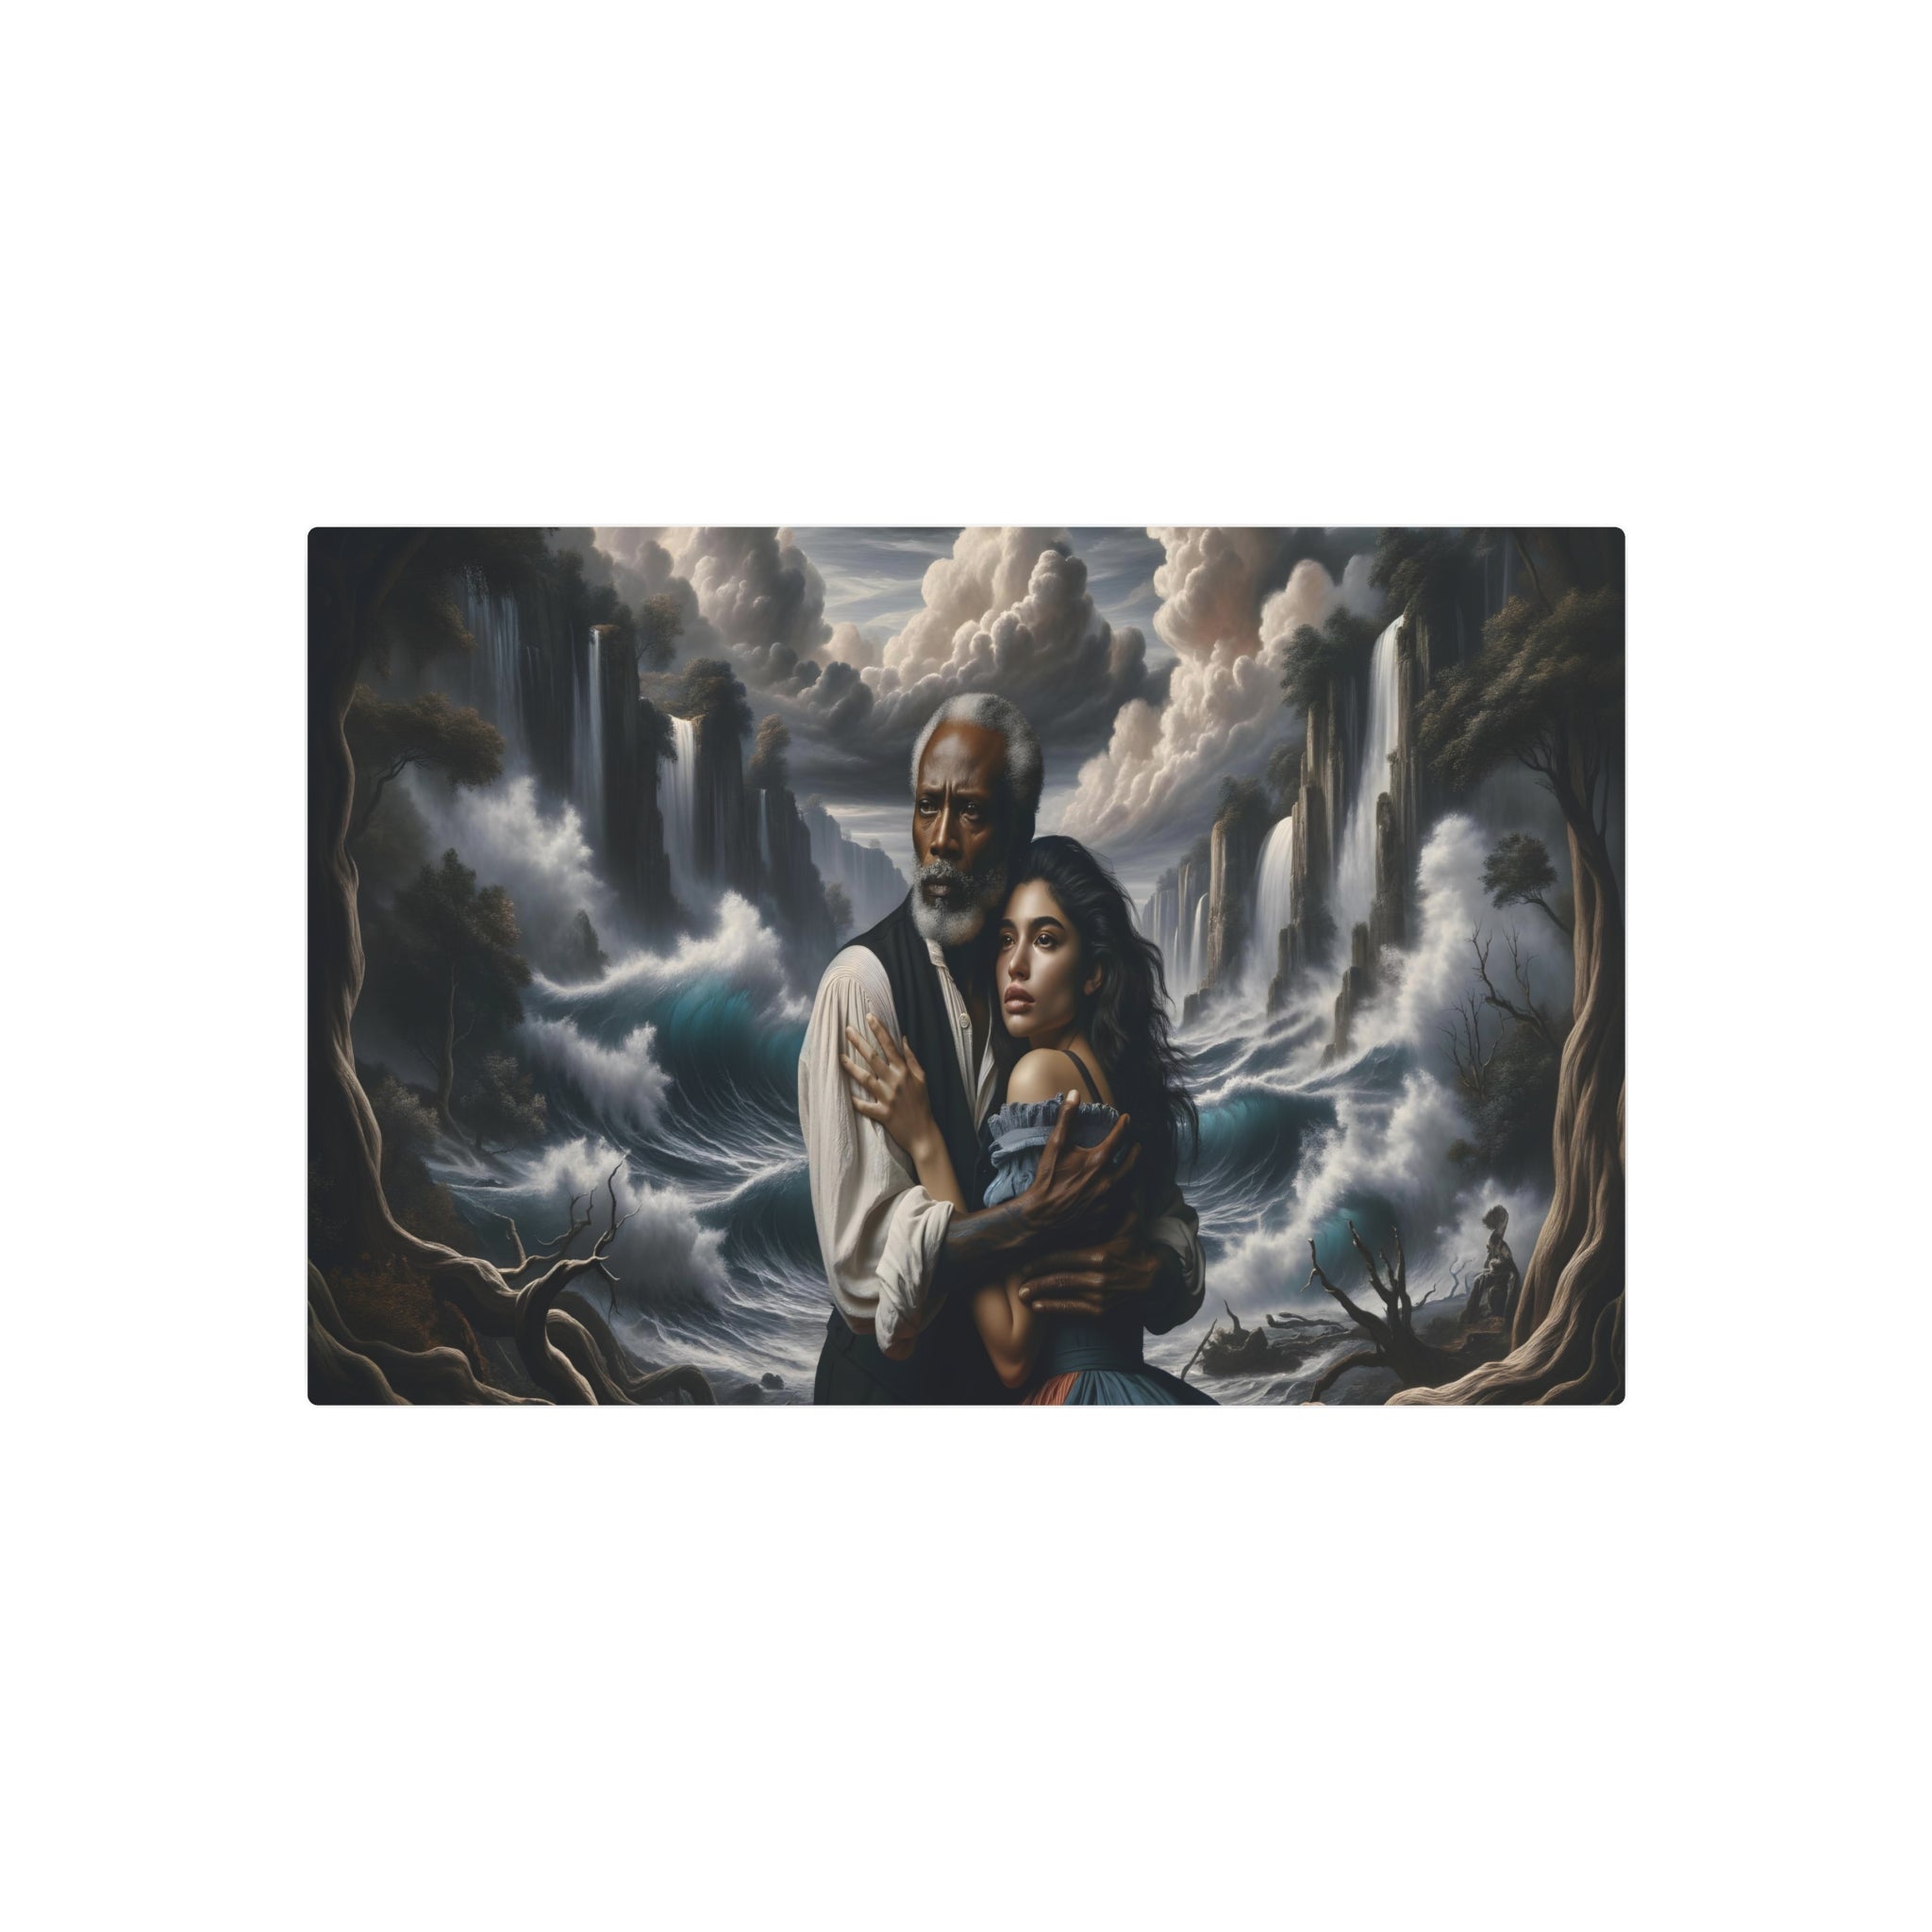 Metal Poster Art | "Romanticism Art Style - Dramatic Landscape Painting of Man and Woman Embracing in Nature, Featuring Chiaroscuro Lighting Techniques - Western